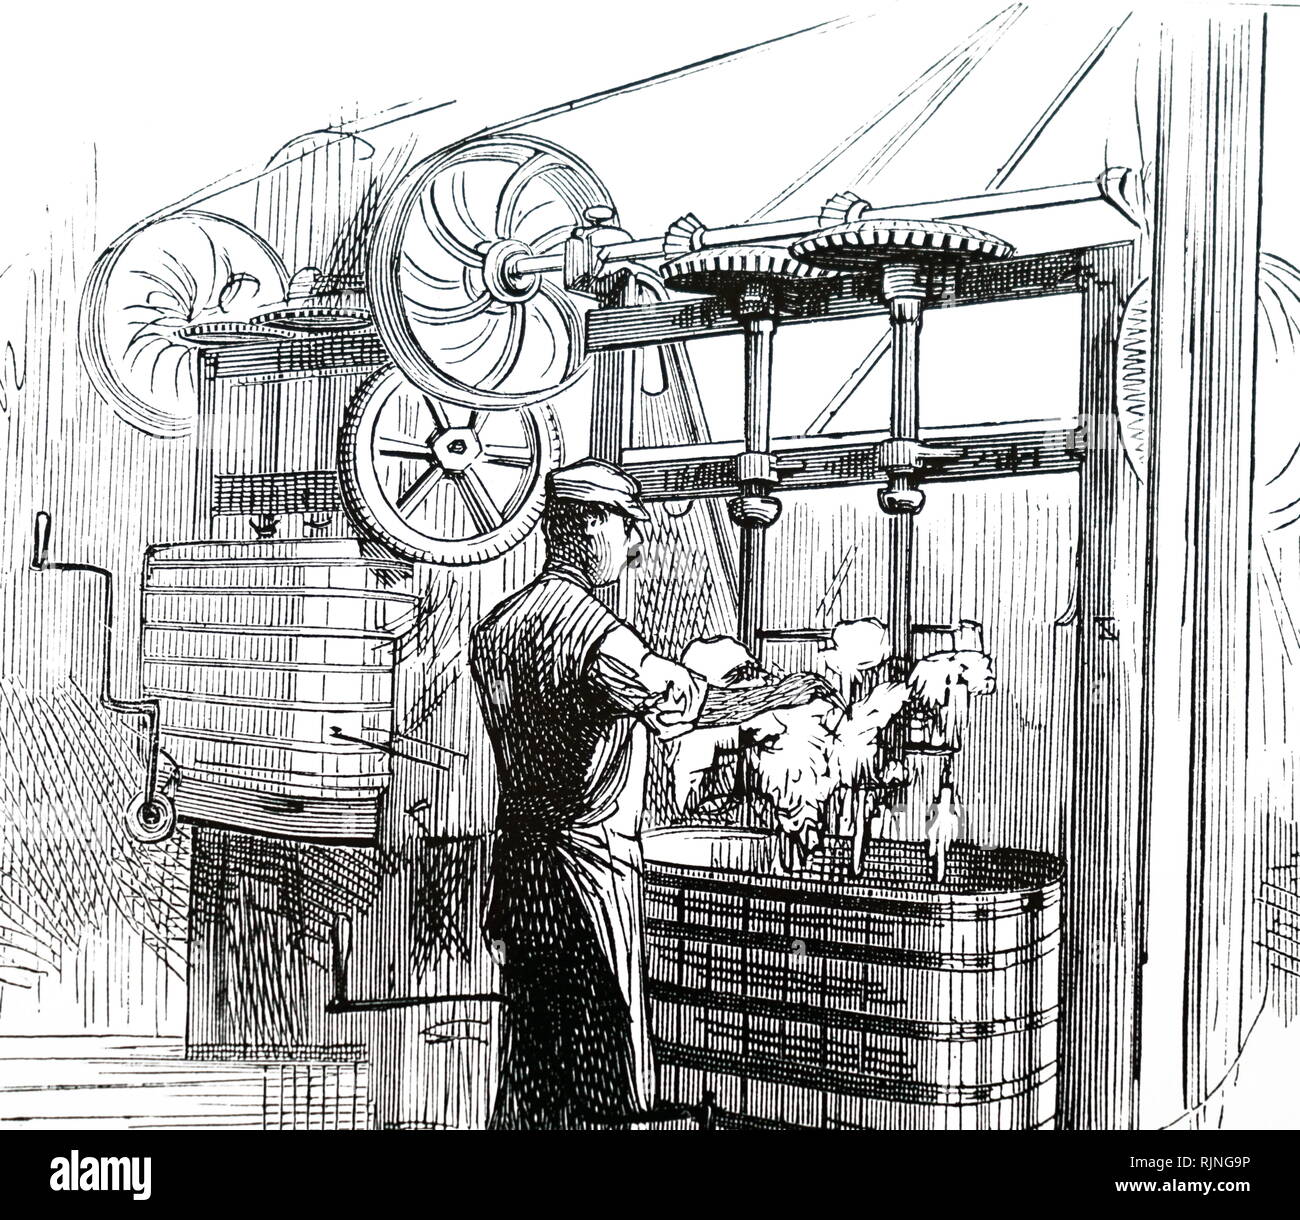 An engraving depicting the mixing drums of Peek, Frean & Co.'s biscuit factory, Southwark Park, London. Dated 19th century Stock Photo